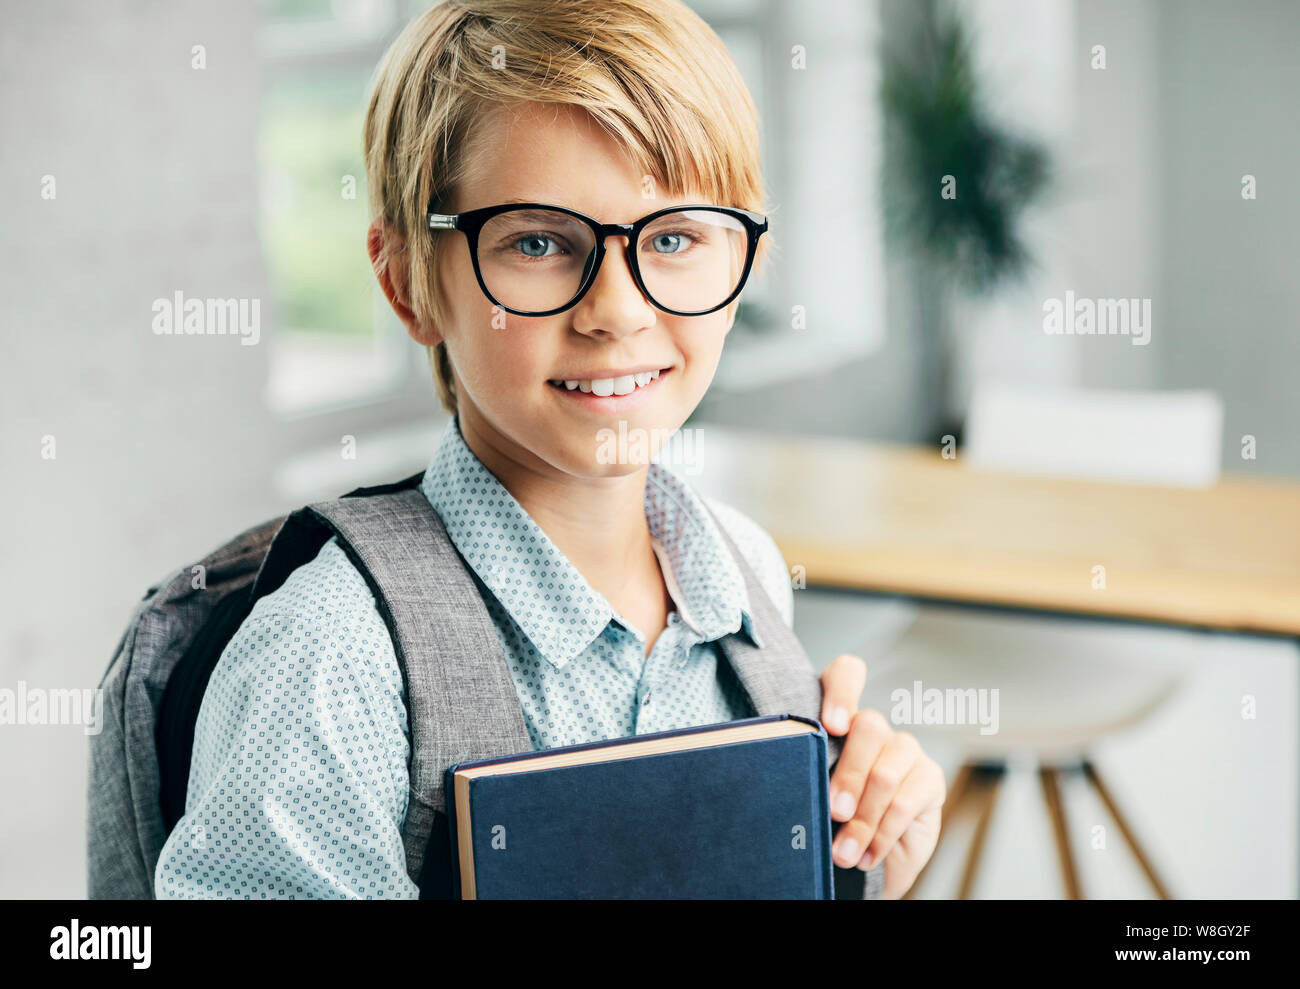 Smiling blond boy holding books in a classroom Stock Photo